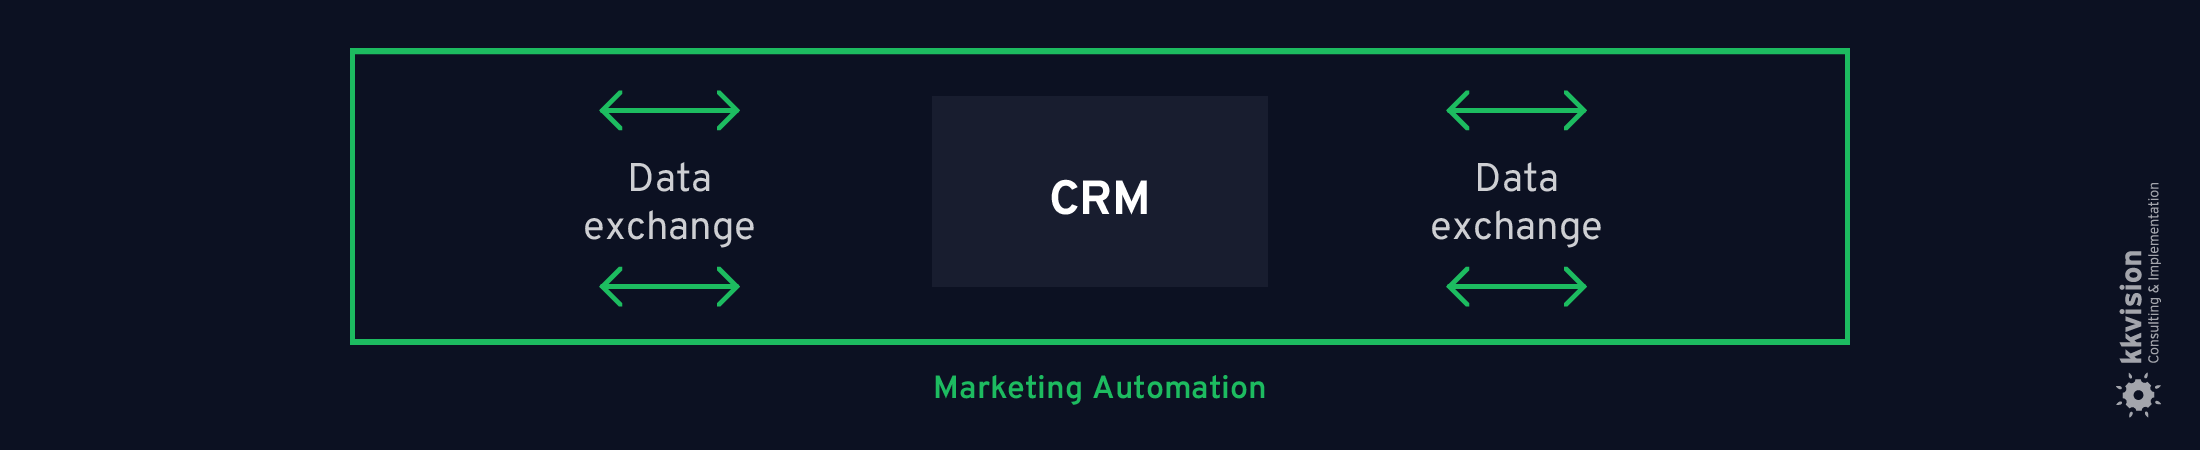 CRM & Marketing Automation_Reporting